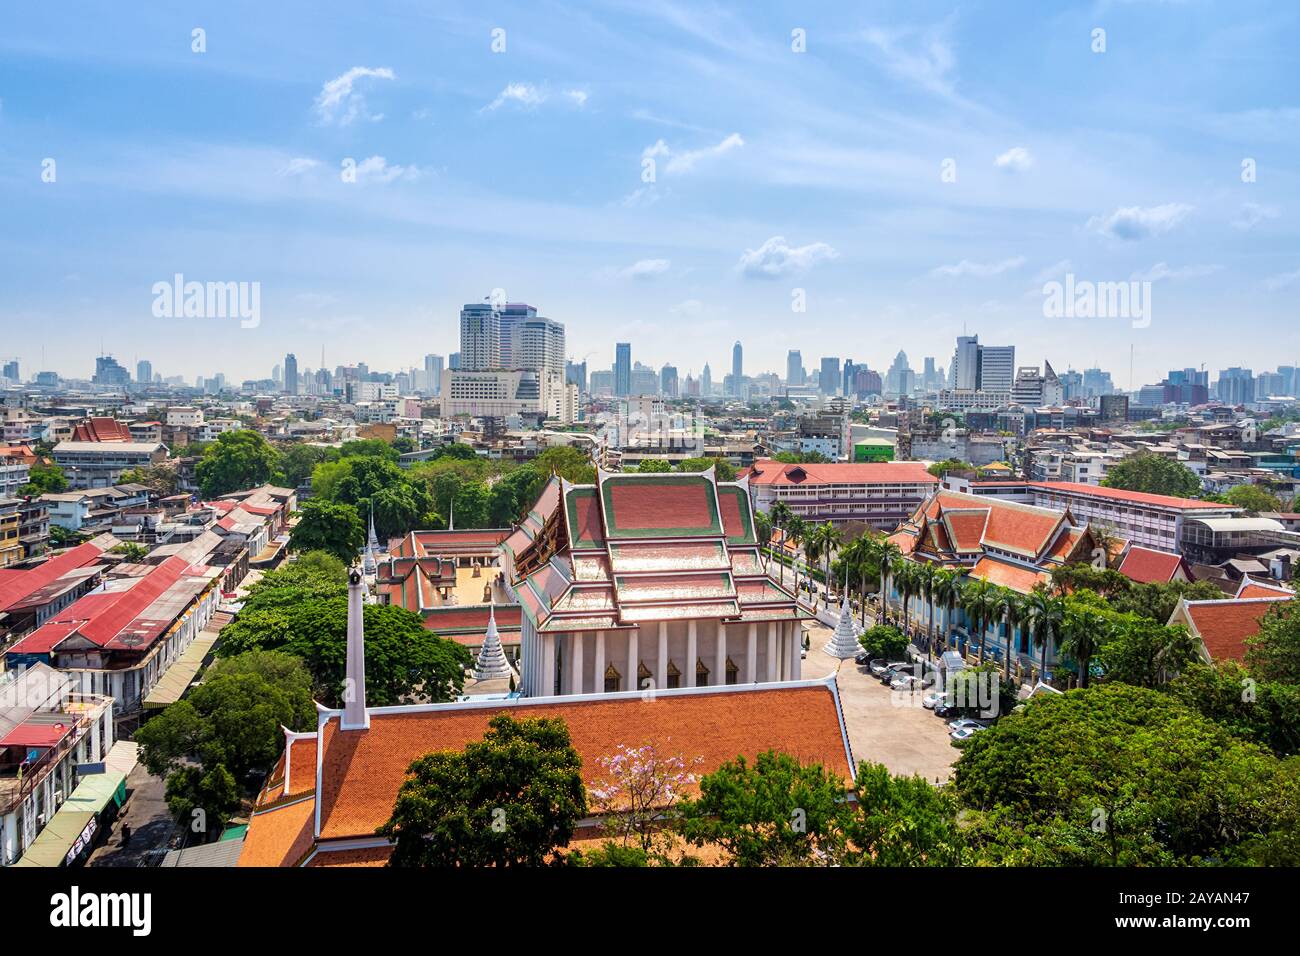 Skyline of Bangkok downtown with old traditional buildings in front, Thailand Stock Photo